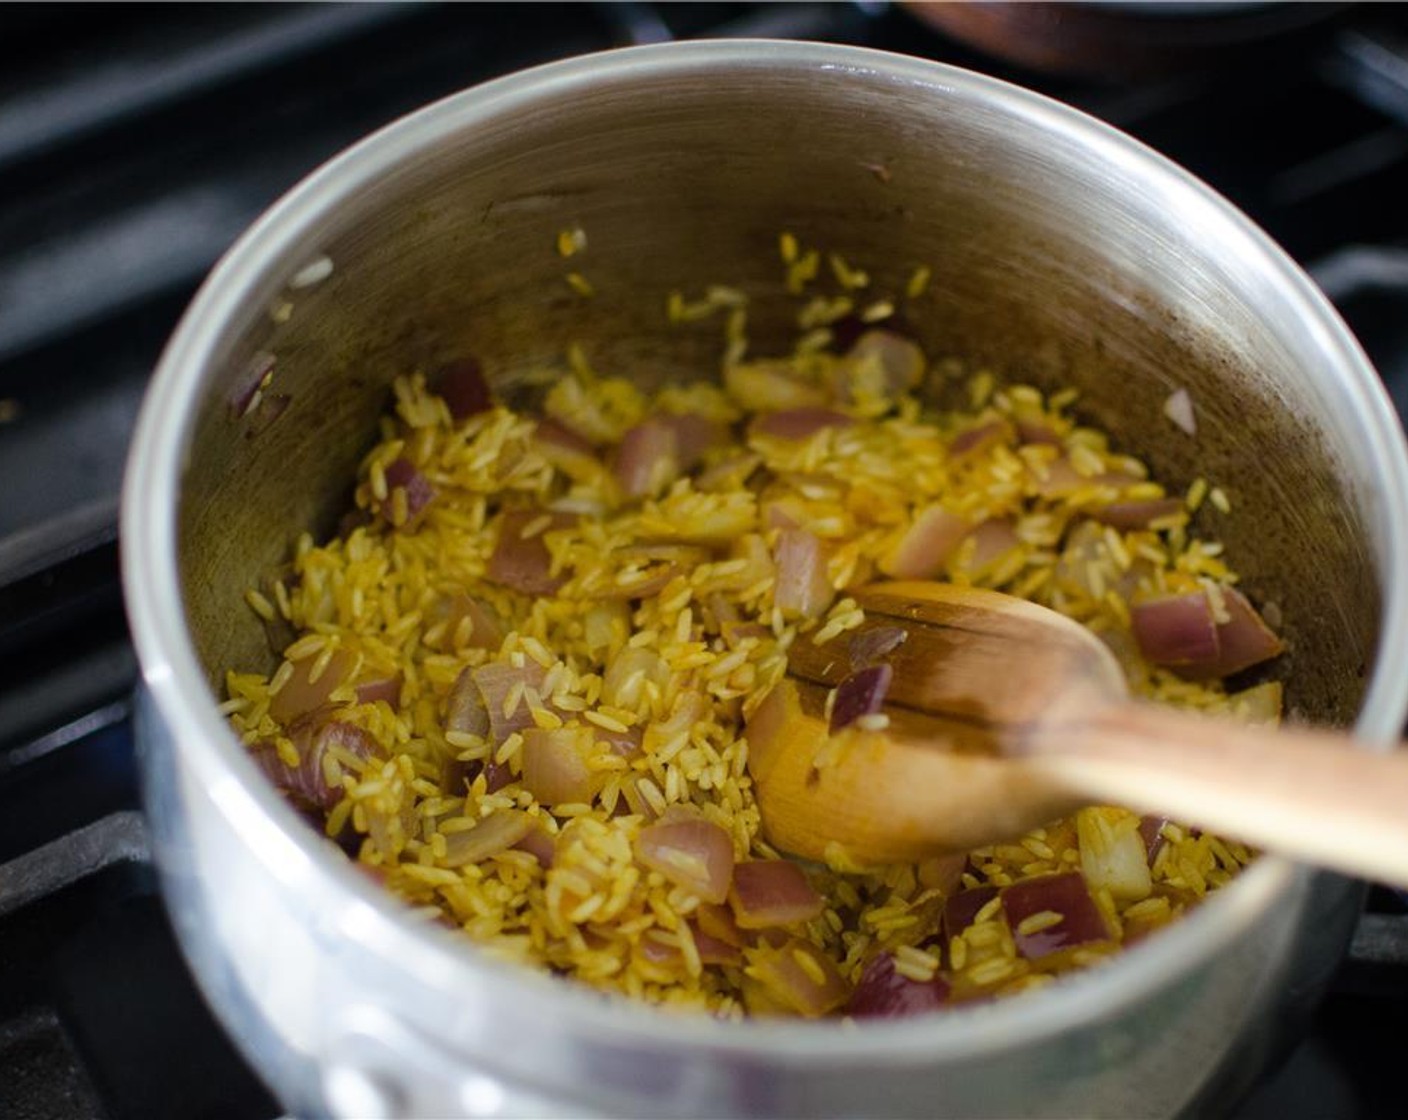 step 4 Add White Rice (2/3 cup), stir to coat. Add Ground Turmeric (1 tsp), 1 1/3 cup of water and 1/2 tsp salt. Bring to boil over high heat. Reduce to simmer until liquid is absorbed and rice is tender, 15-18 minutes.